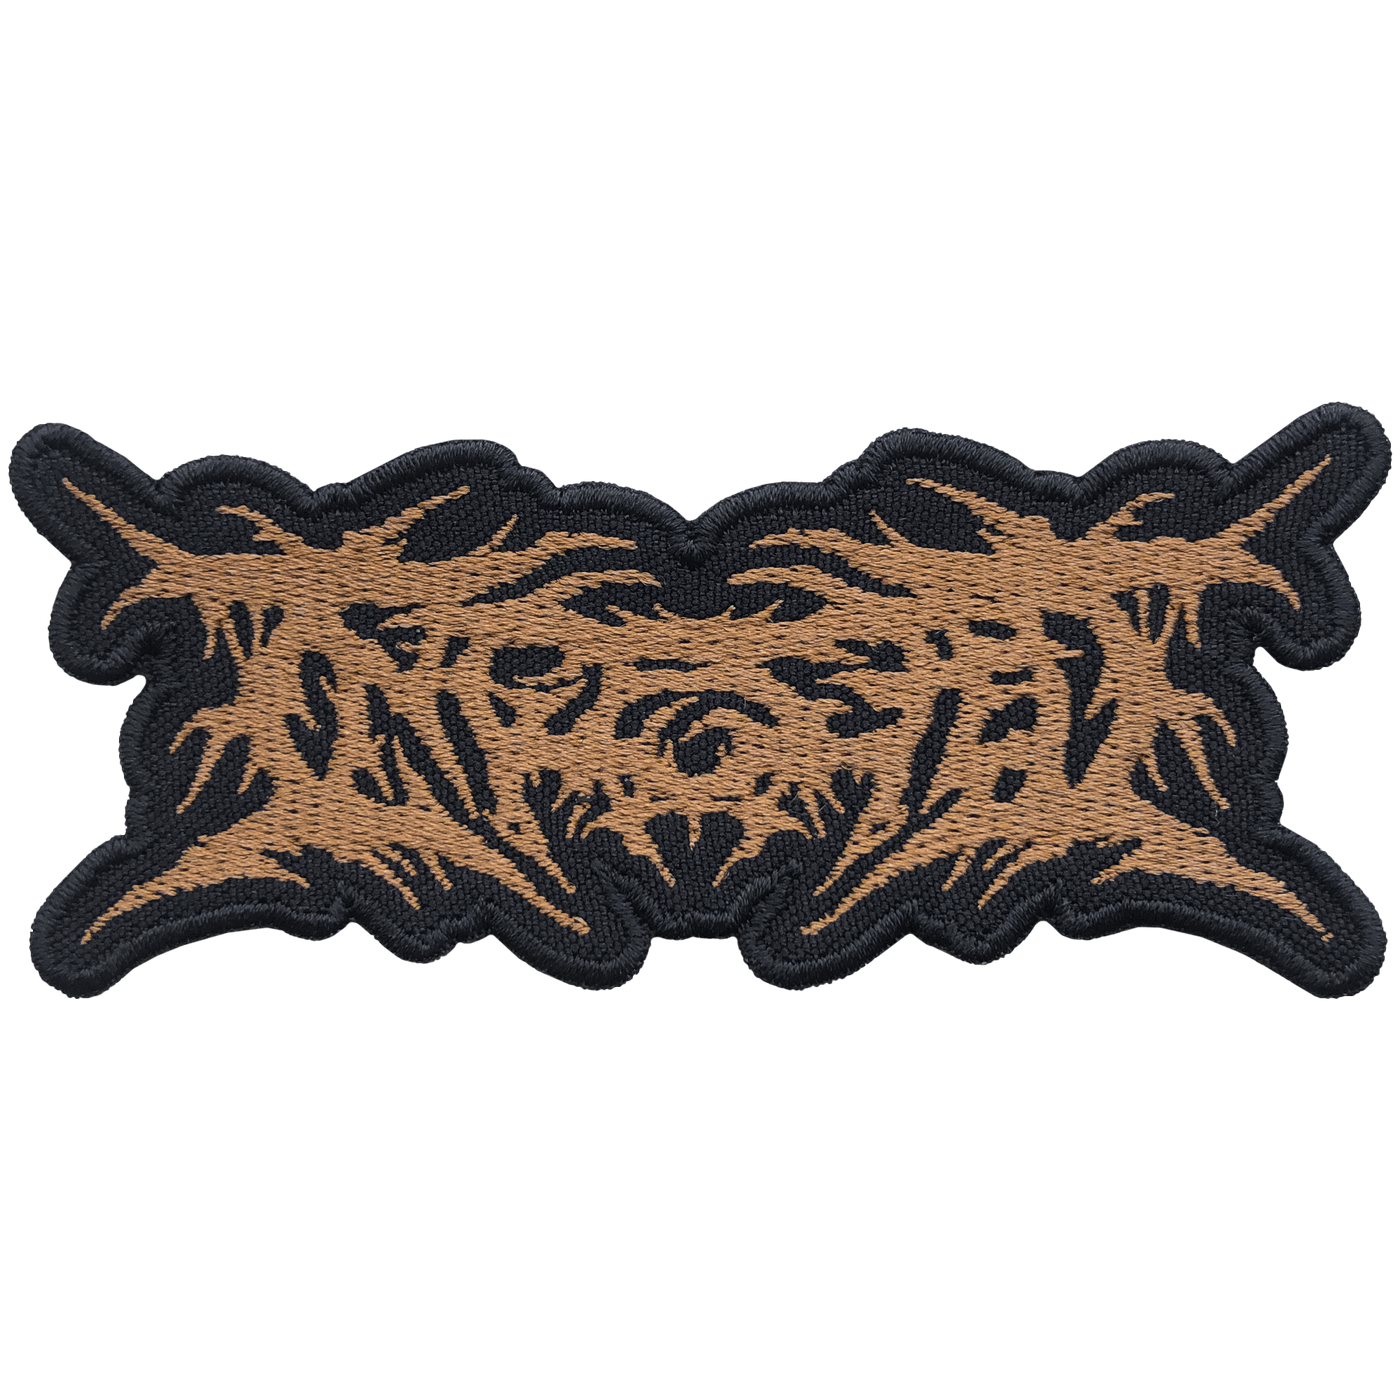 Ingested Patches